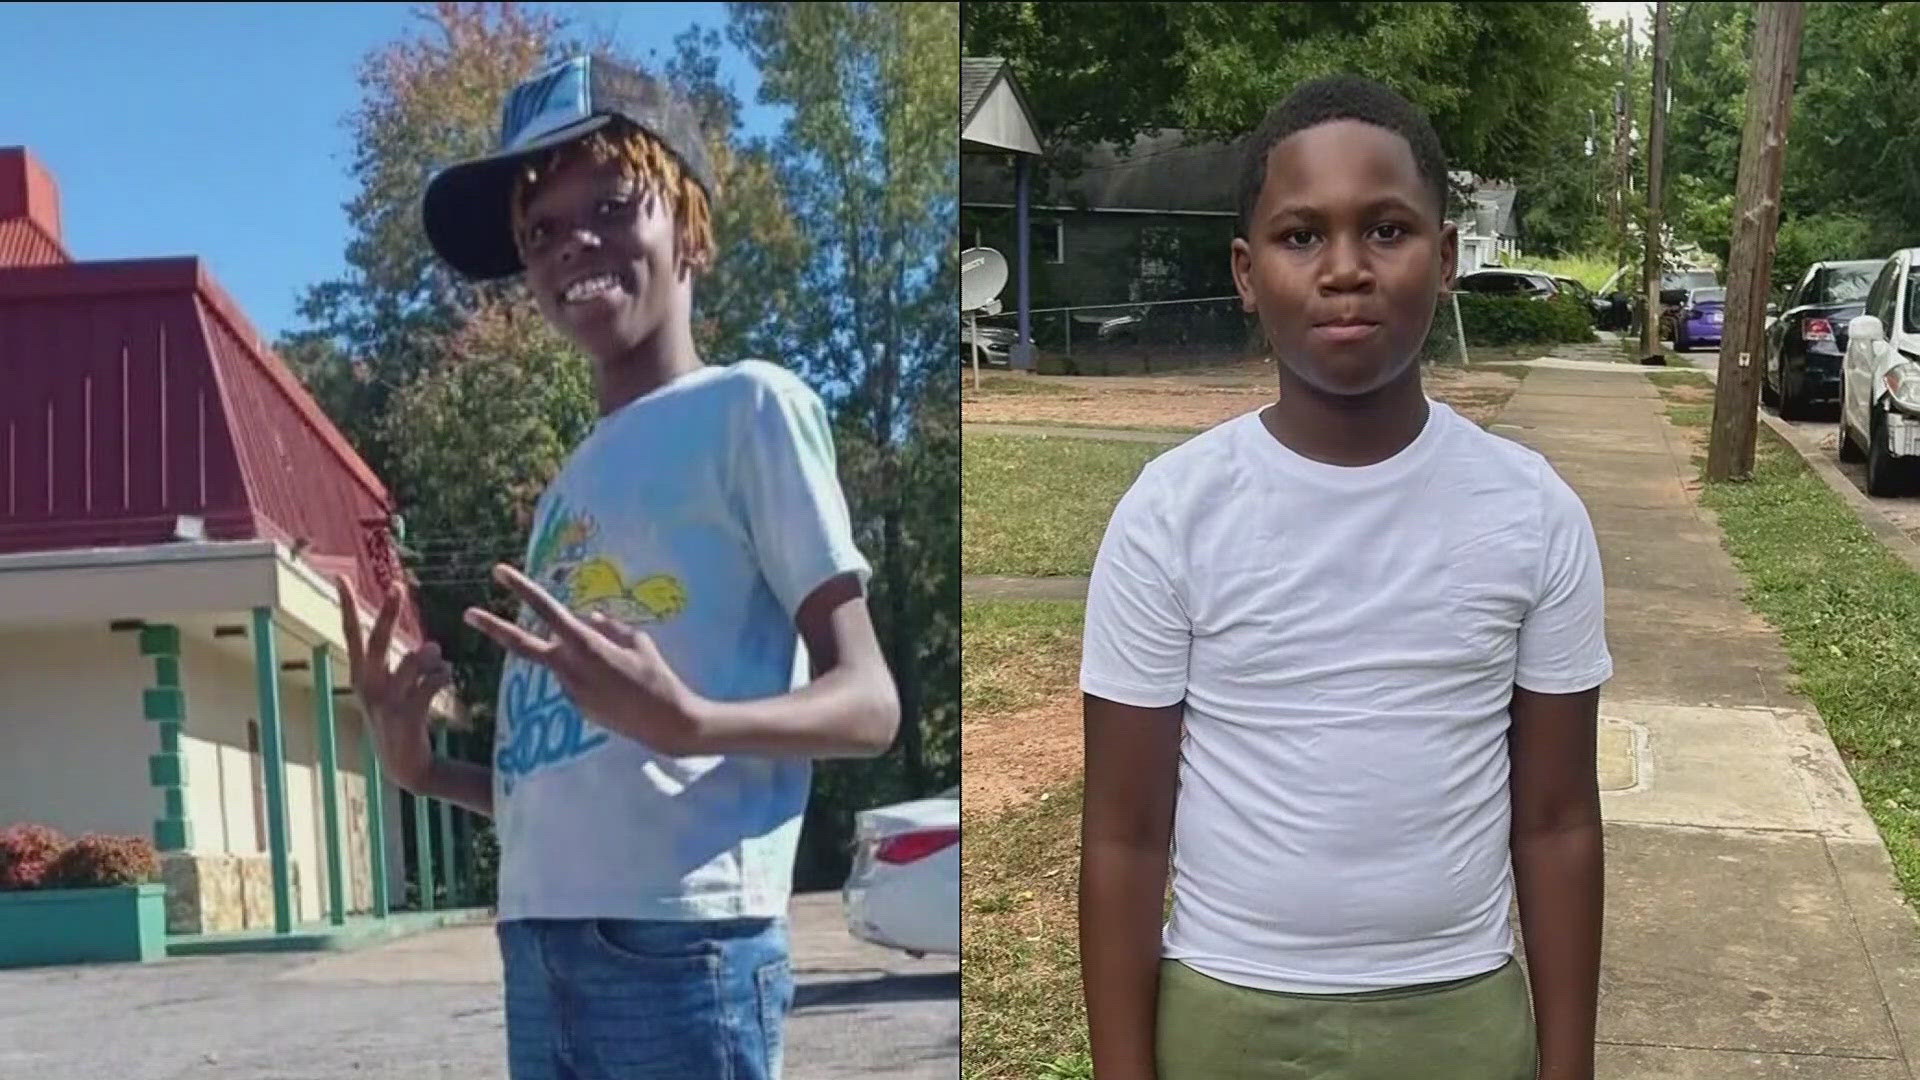 Loved ones are grieving the loss of Lamon Freeman and Jacody Davis. Families said they were celebrating Lamon's birthday when the gunshots rang out.